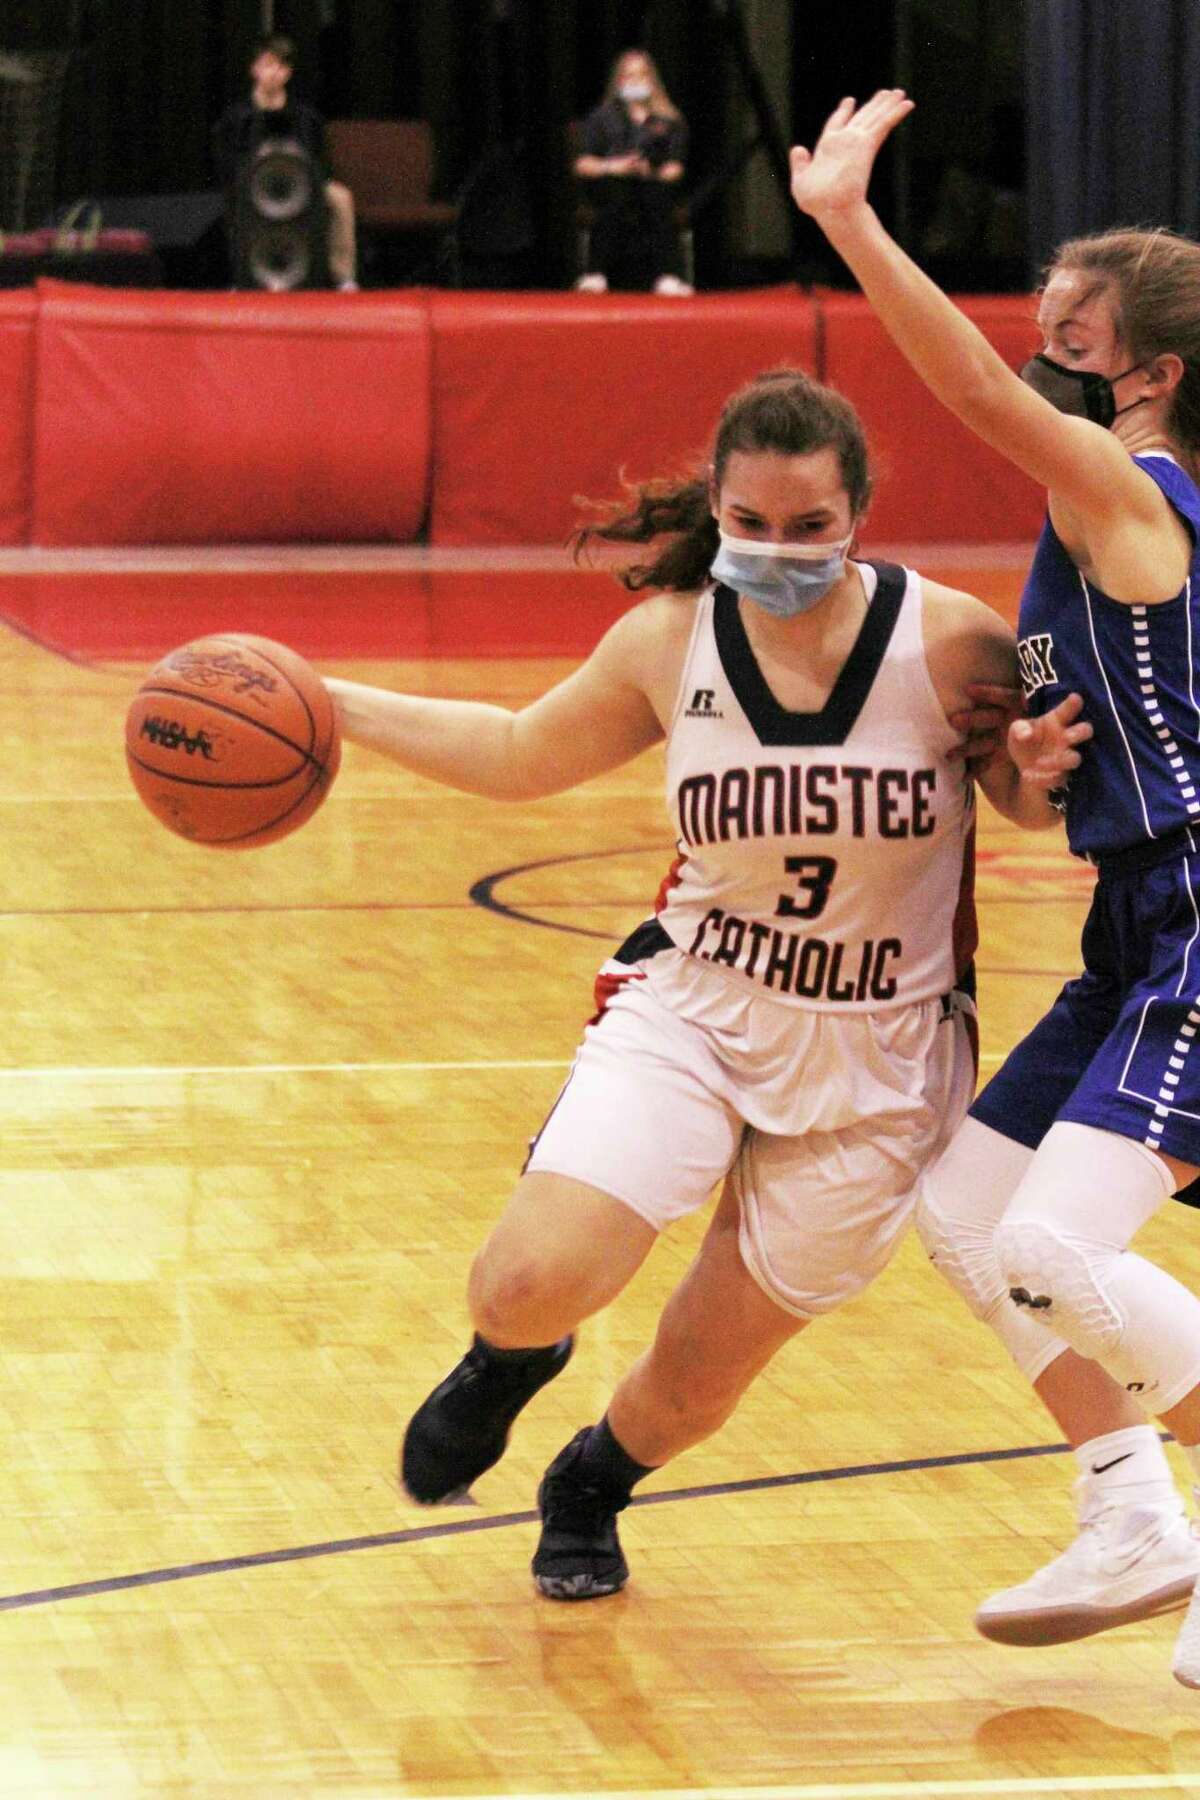 Manistee Catholic Central's Leah Stickney was an honorable mention in last year's all-West Michigan D League selections. (File photo)